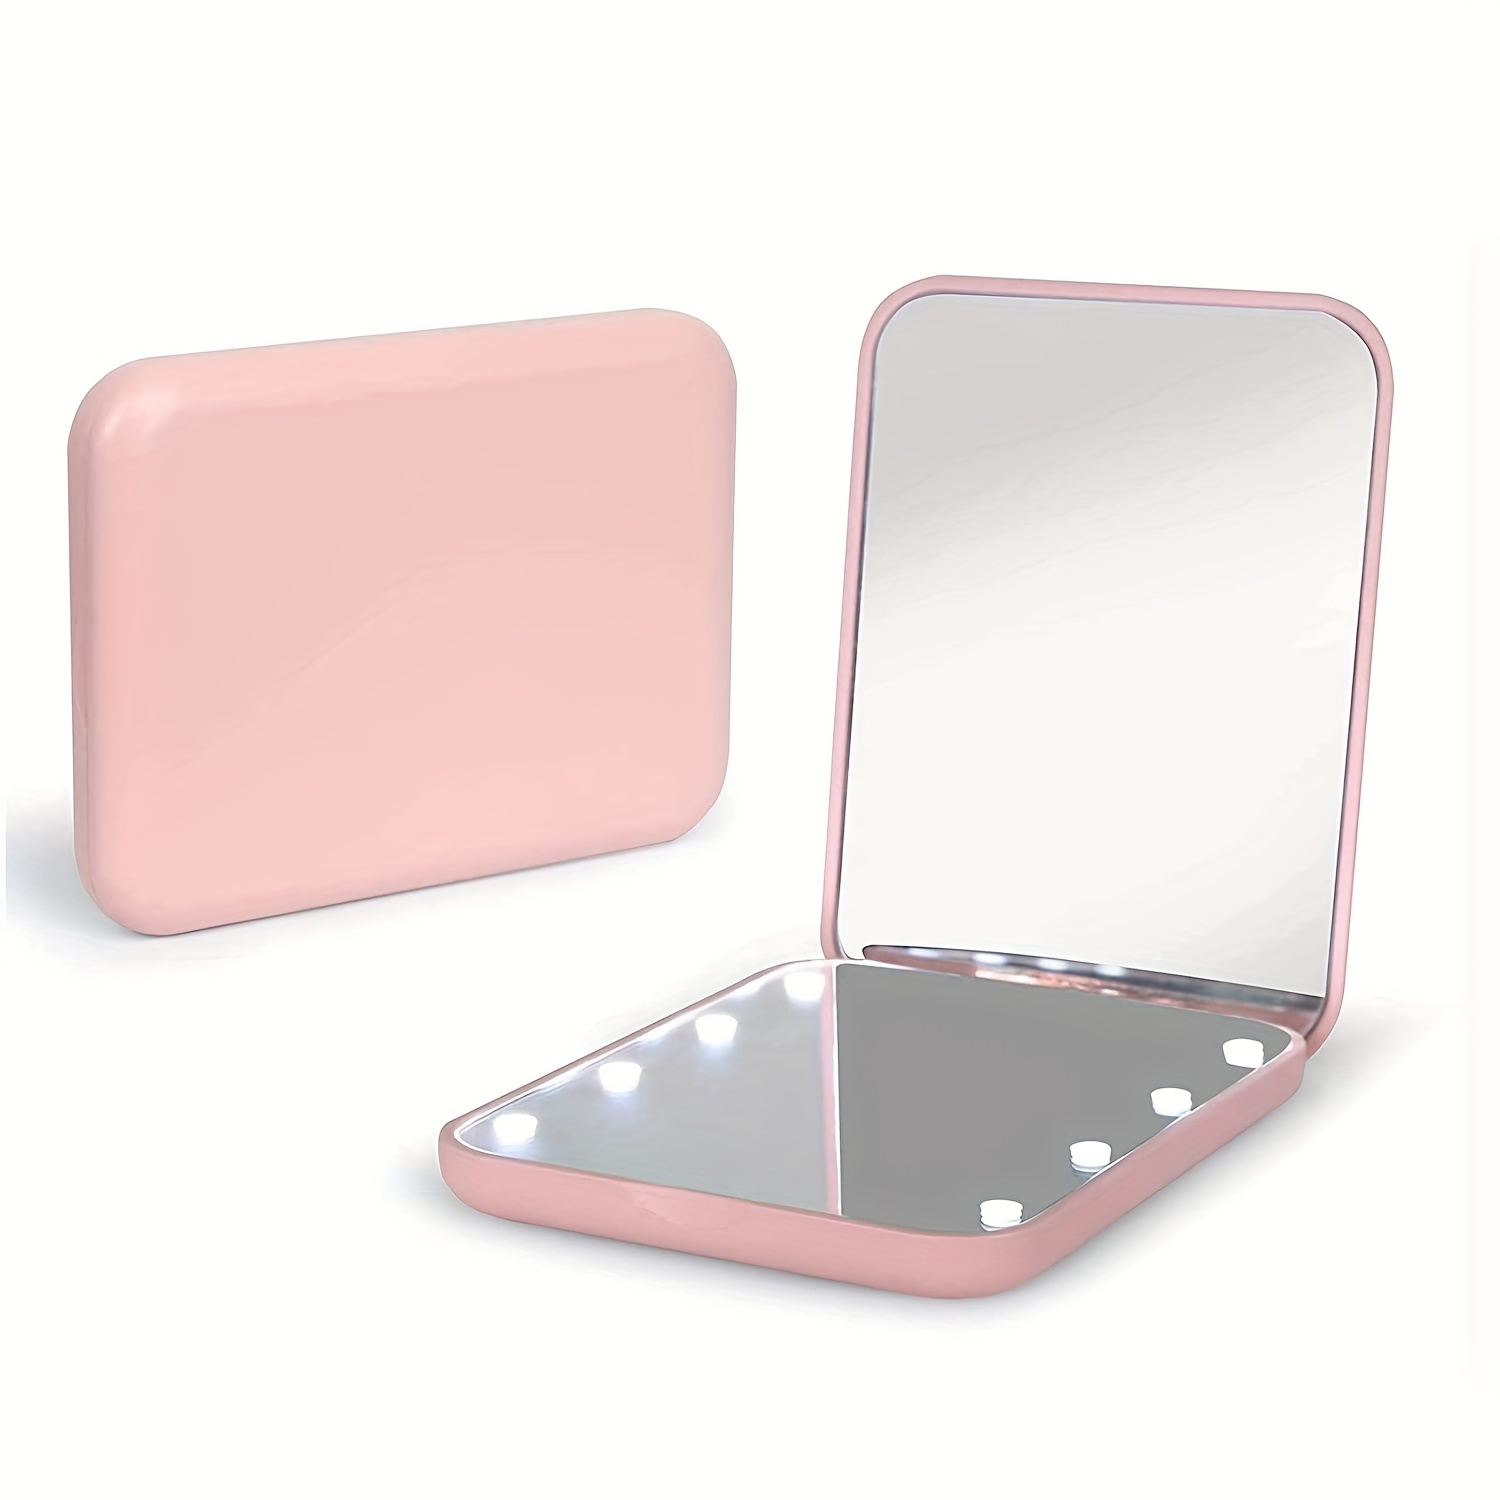 xuanou123 Pocket Mirror 1X/3x Magnified LED Mini Travel Makeup Mirror, Compact Mirror With Lights, Wallet Mirror, Double-sided, Portable, Folding, Hand-held, Small Lighting Makeup Mirror, Suitable For Gift